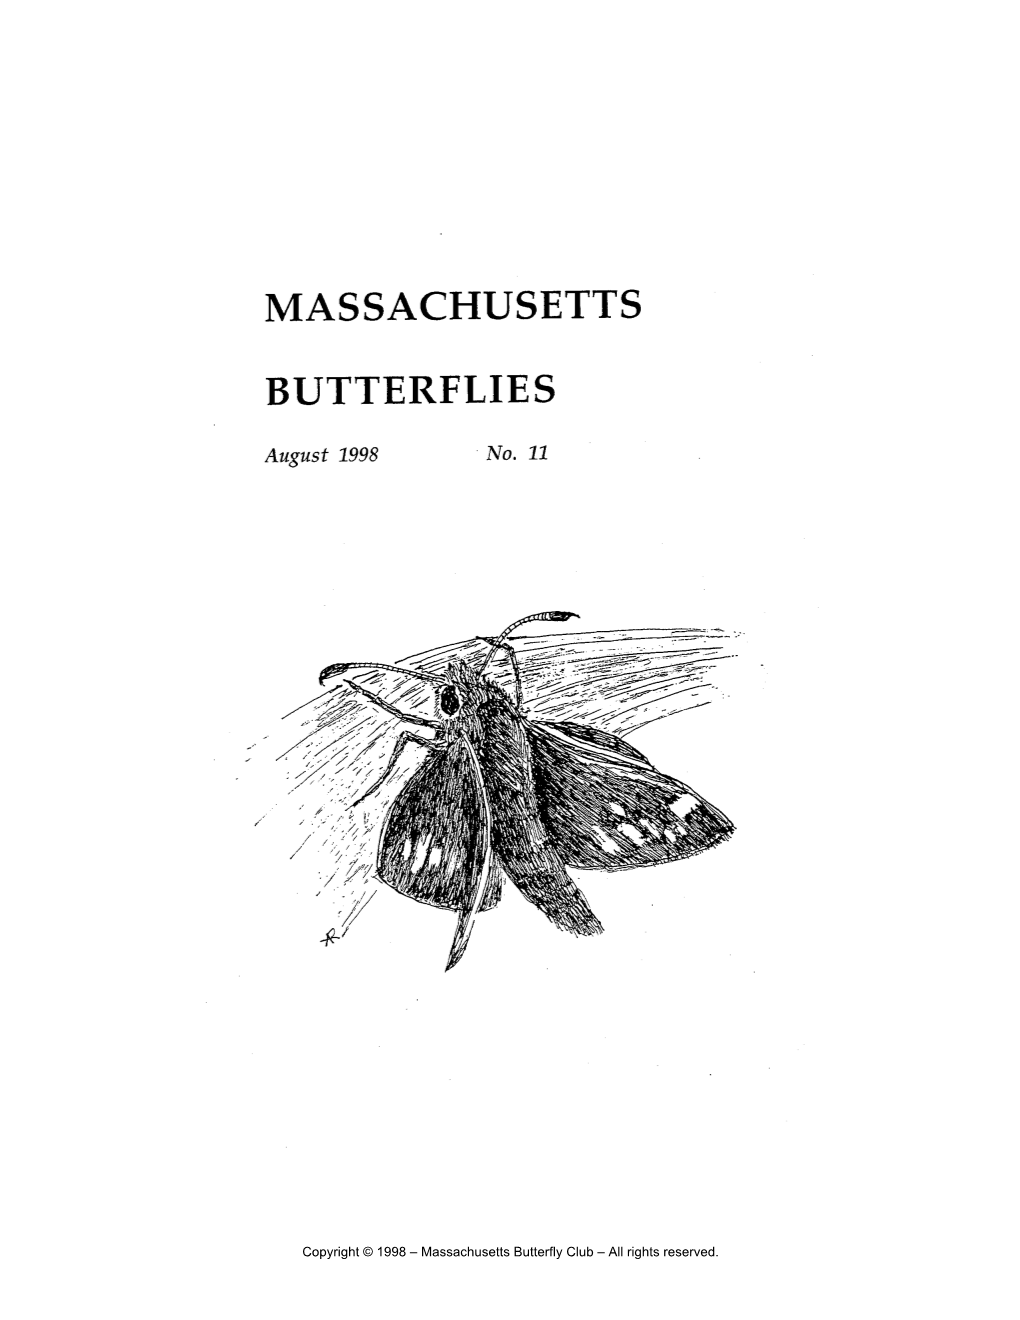 MASSACHUSETTS BUTTERFLIES" Is the Semi-Annual Publication of the Massachusetts Butterfly Club, a Chapter of the North American Butterfly Association